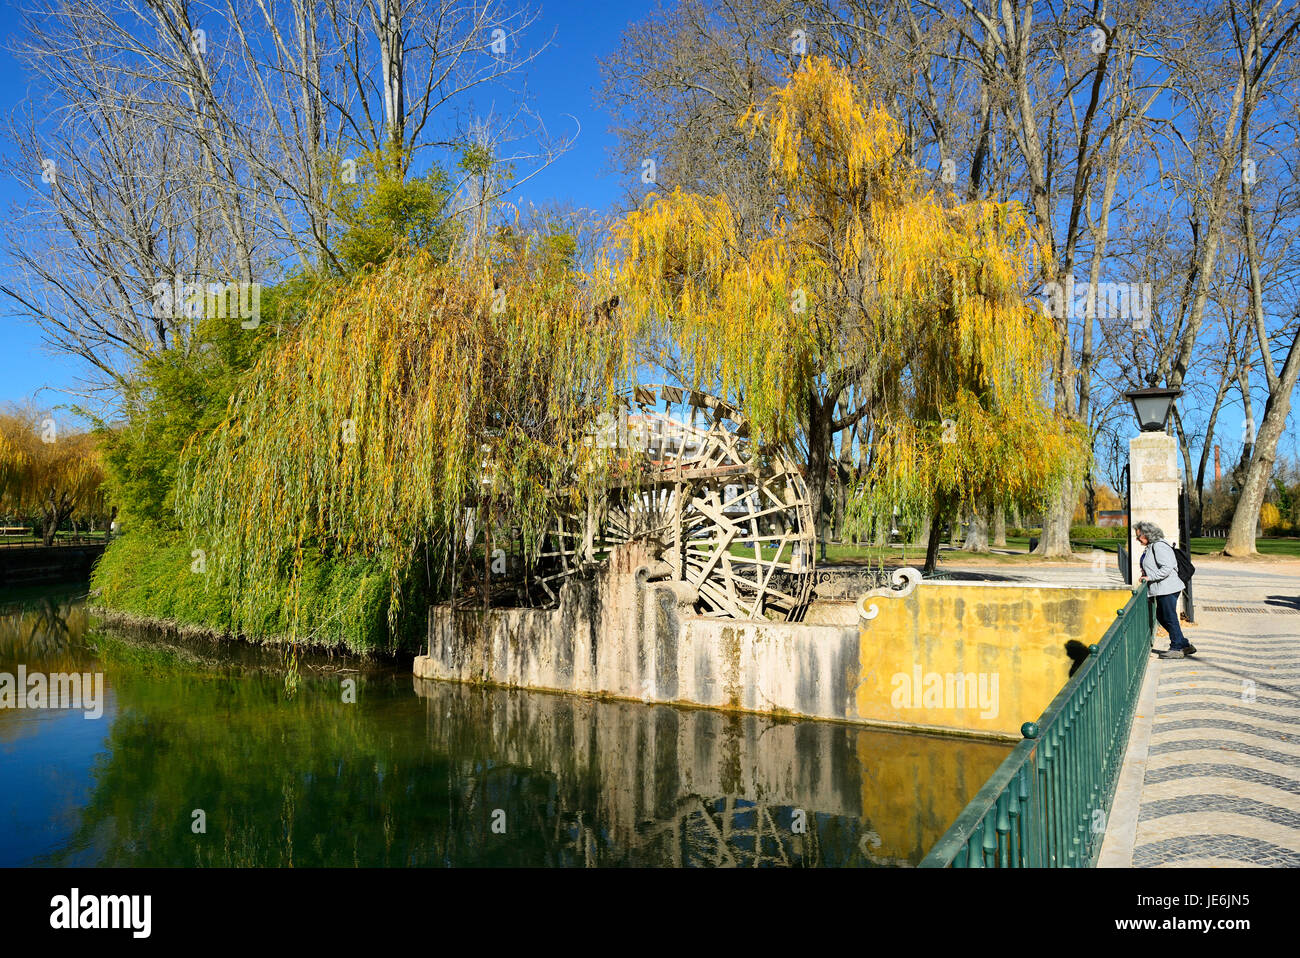 A noria of arab origin in the Nabão river, surrounded by a willow tree. Mouchão Park, Tomar. Portugal Stock Photo